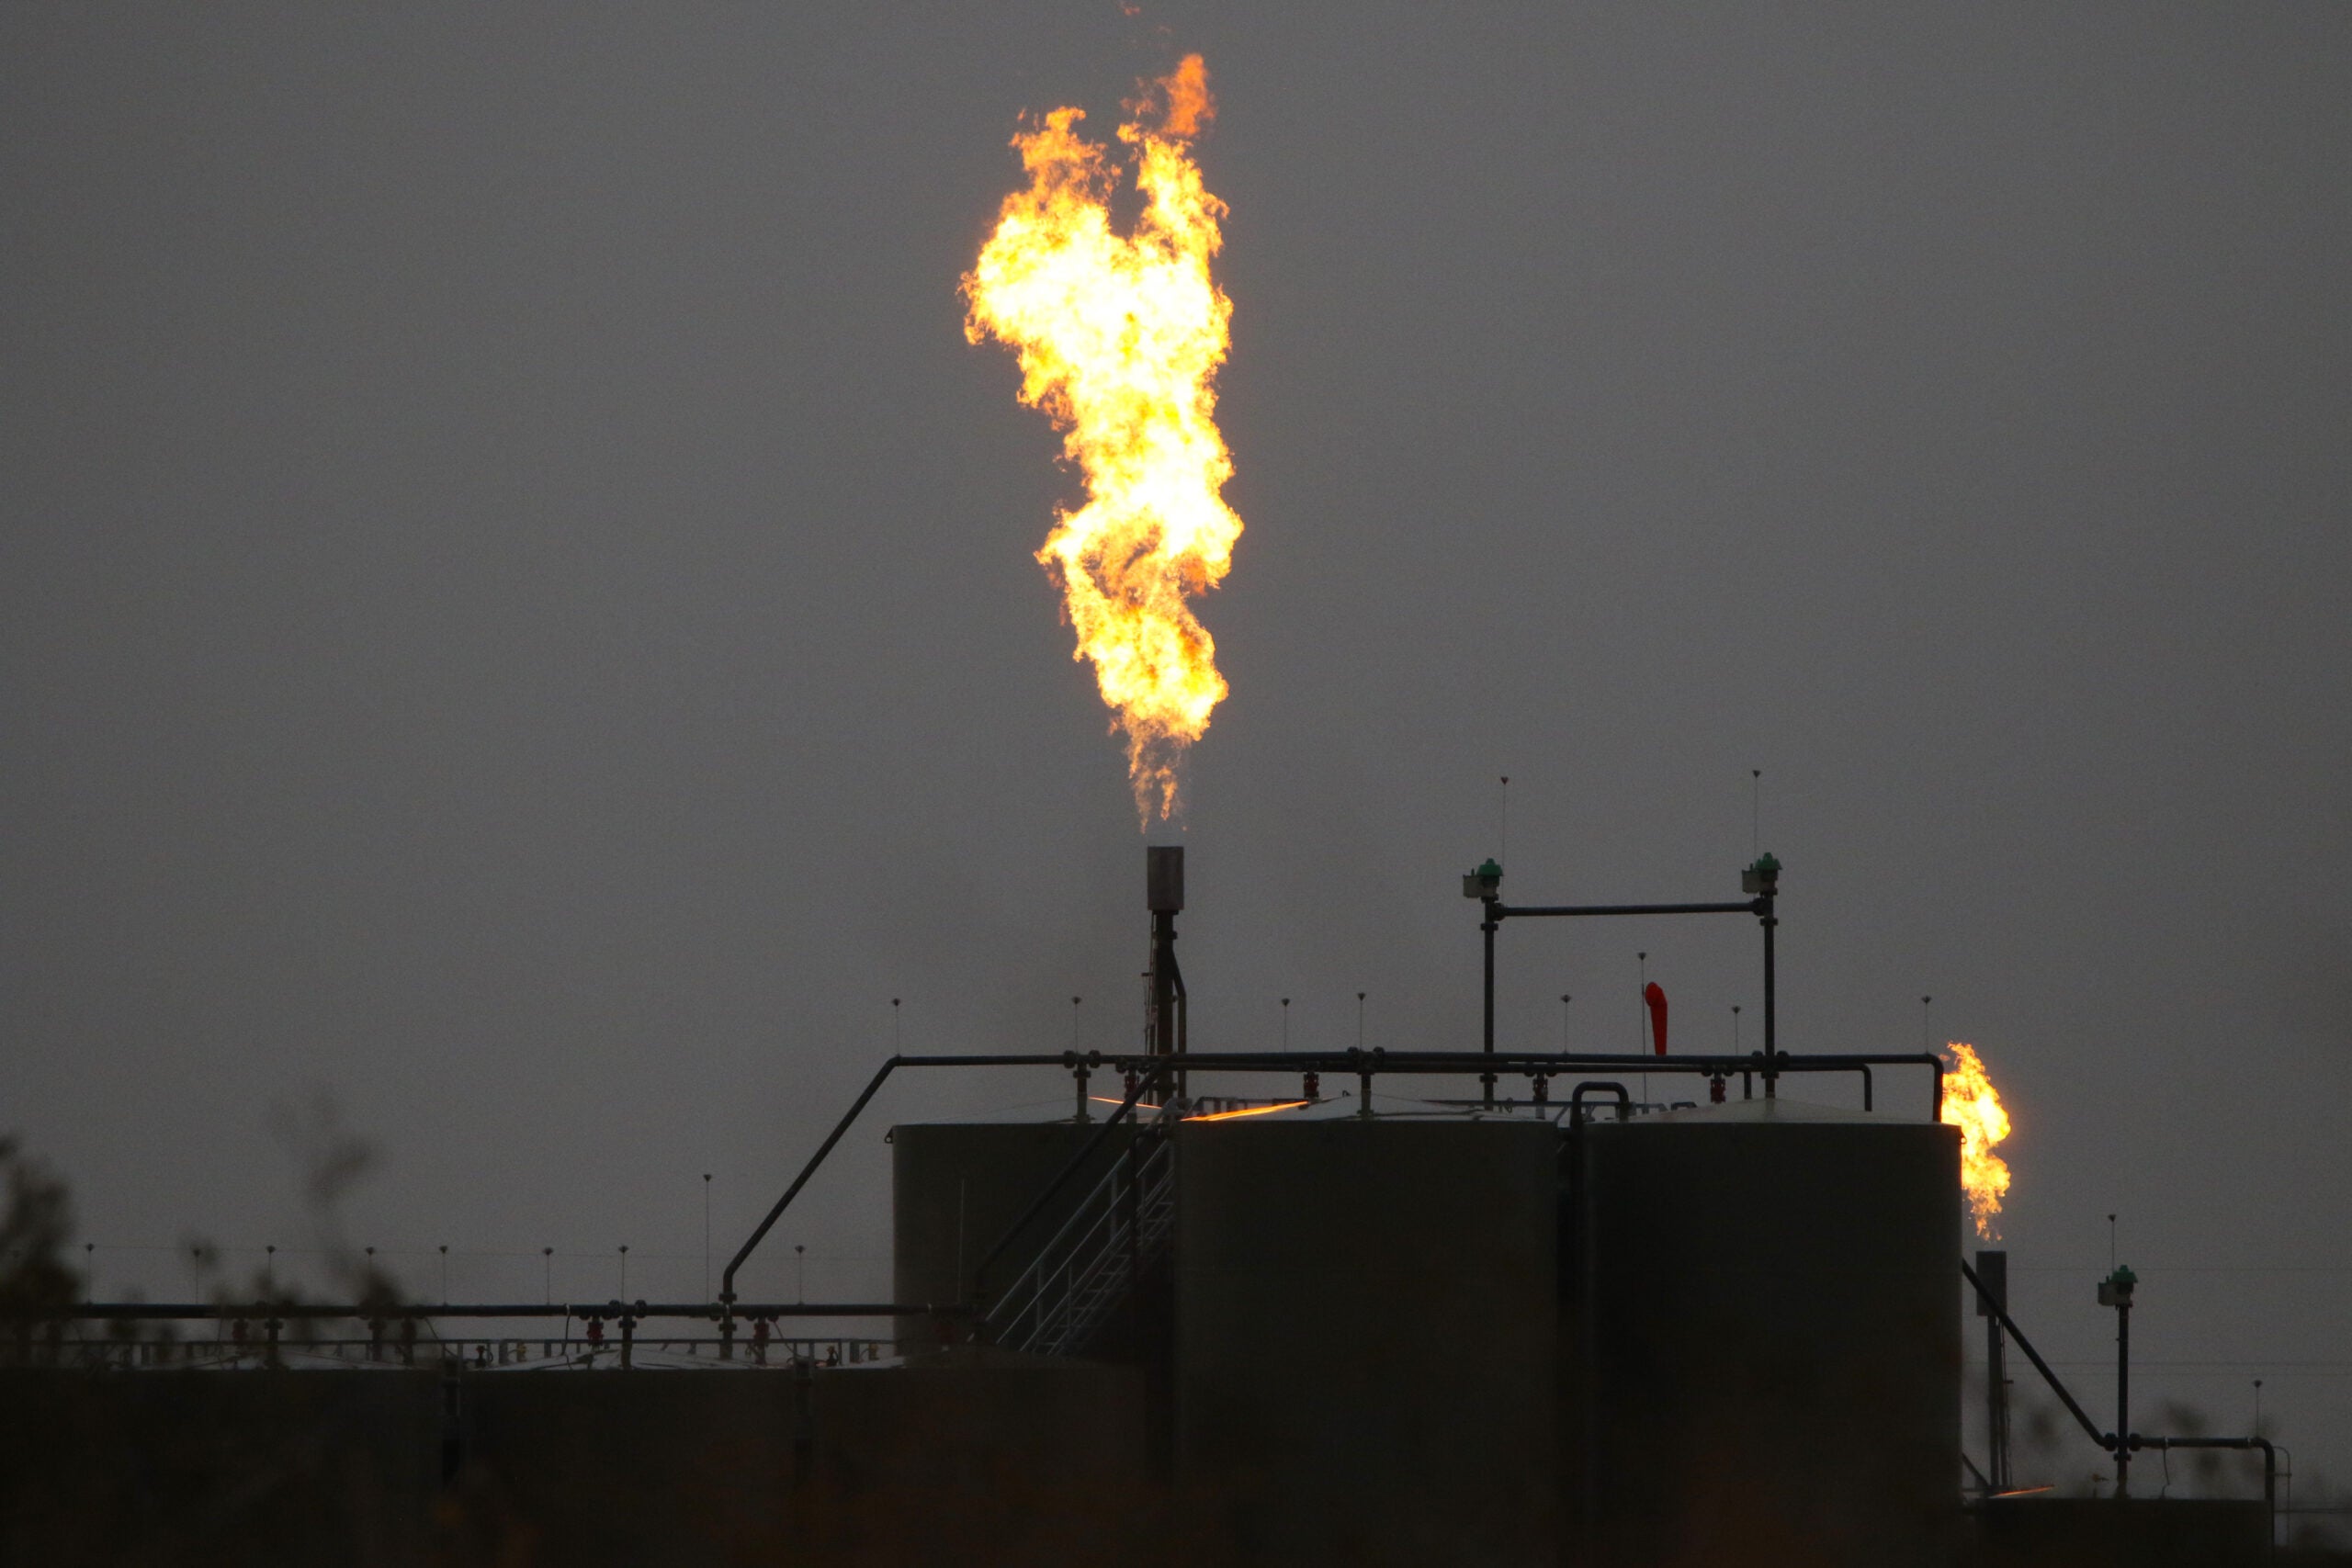 Why Texas’ attempt to delay commonsense methane protections will only shoot itself – and the US oil and gas industry – in the foot.